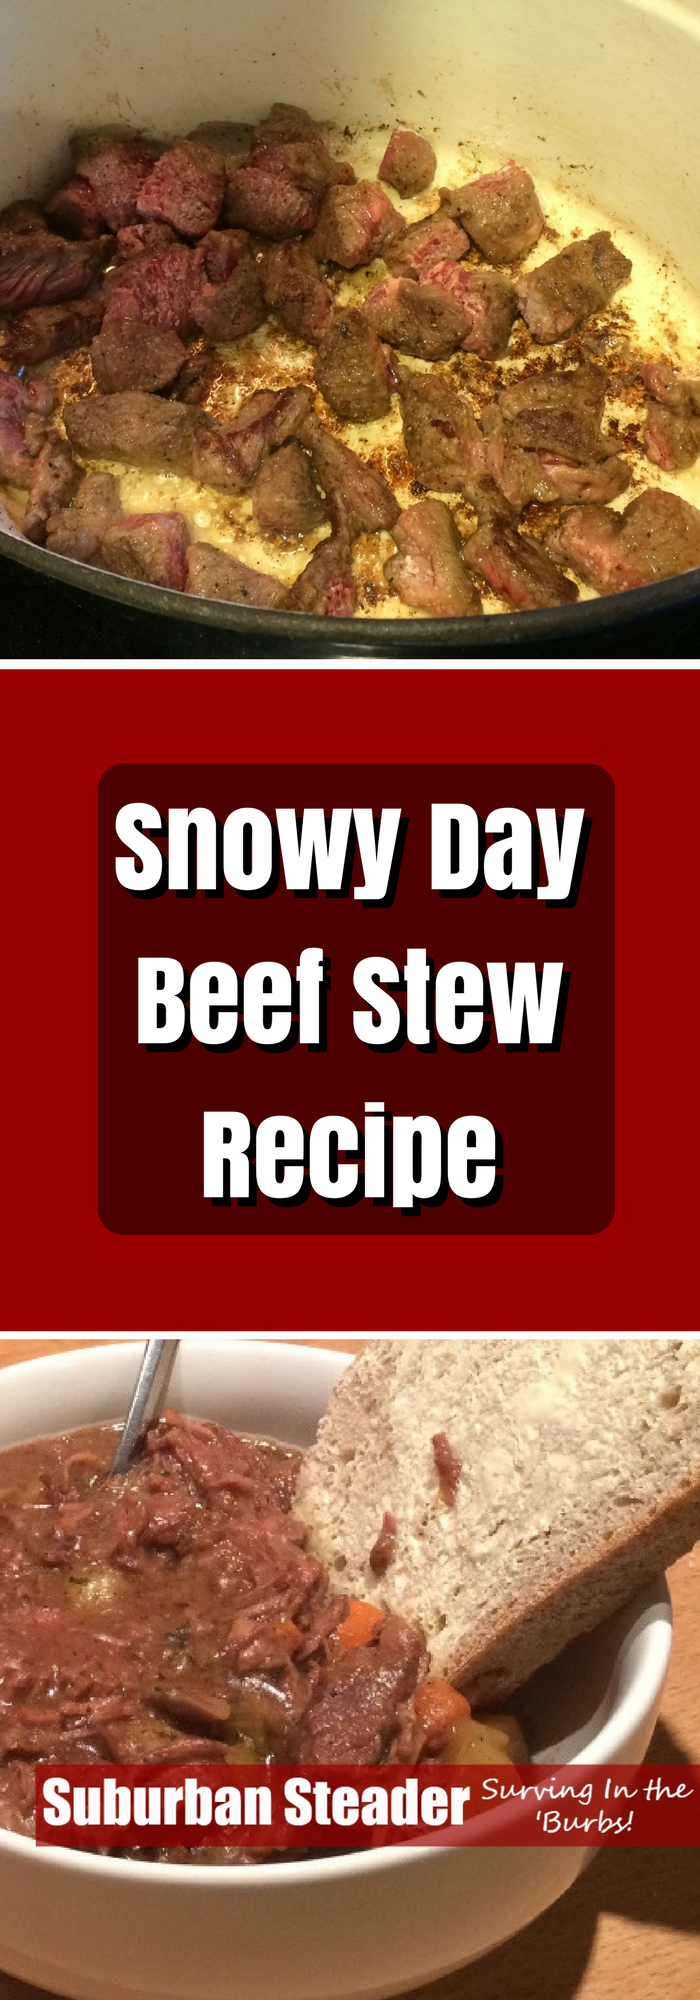 Snowy Day Beef Stew